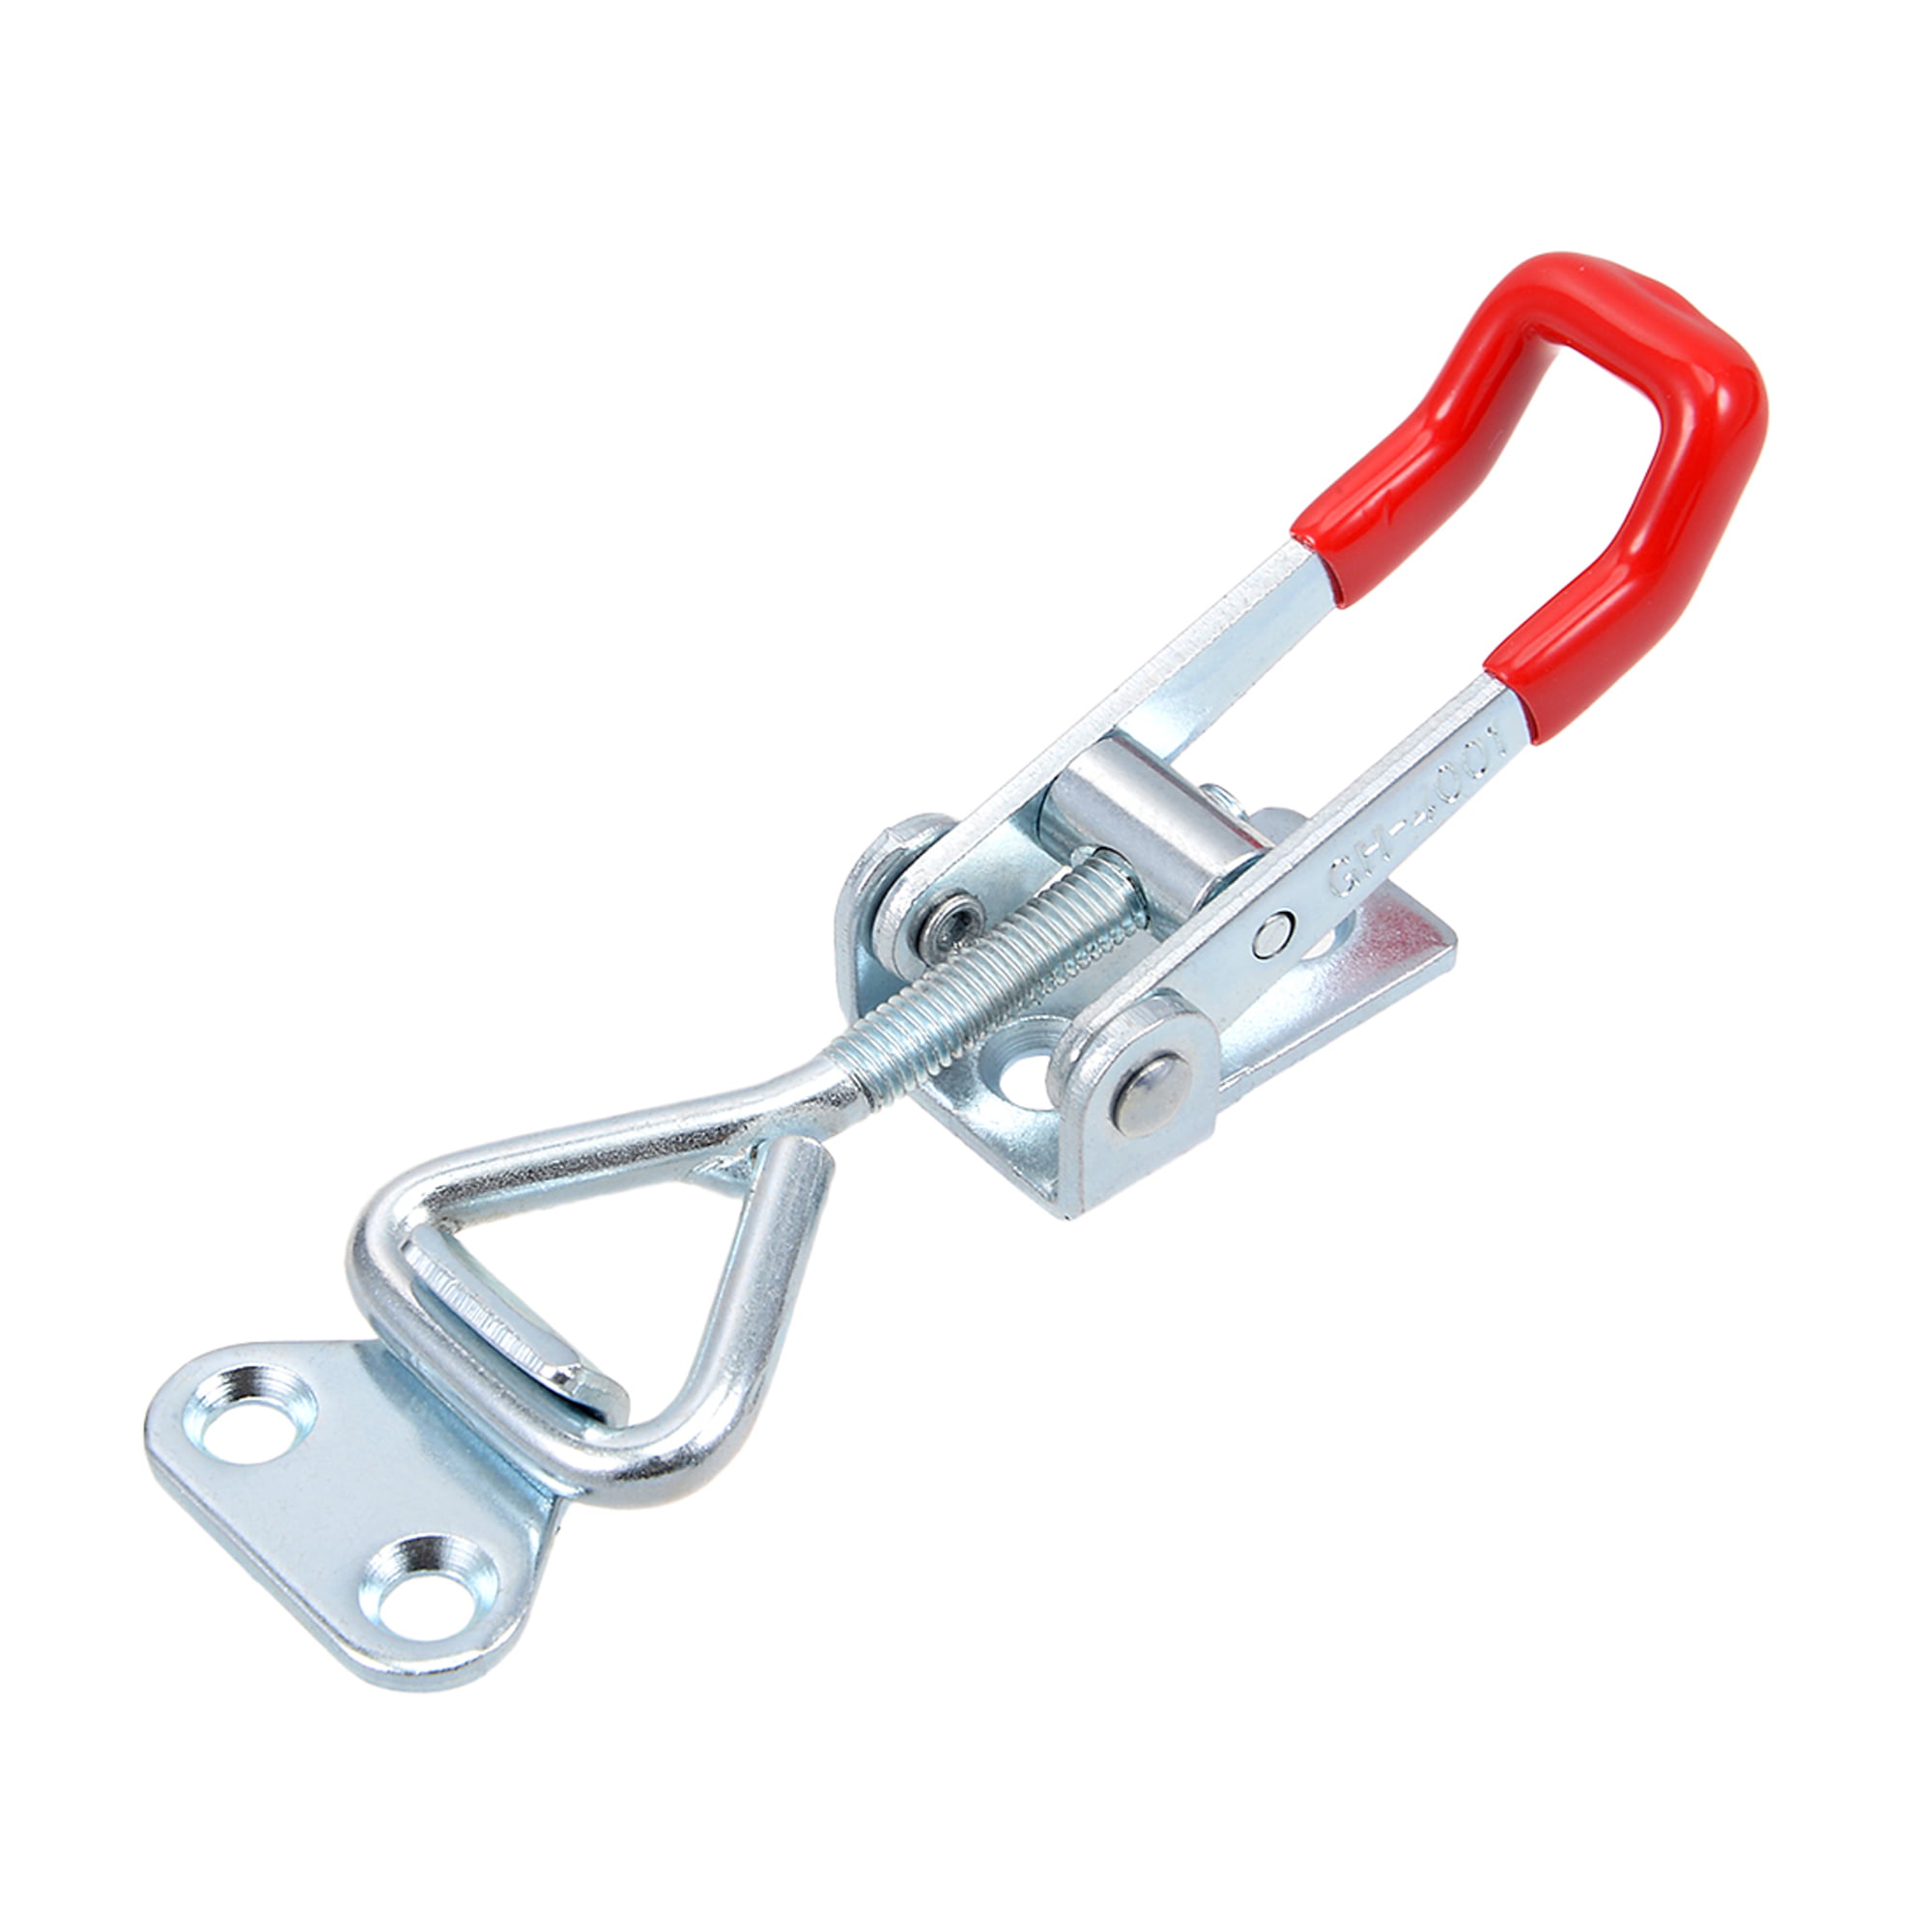 10 Pack Toggle Latch Clamp 4001 Hand Tool 330LB Heavy Duty Toggle Clamps 